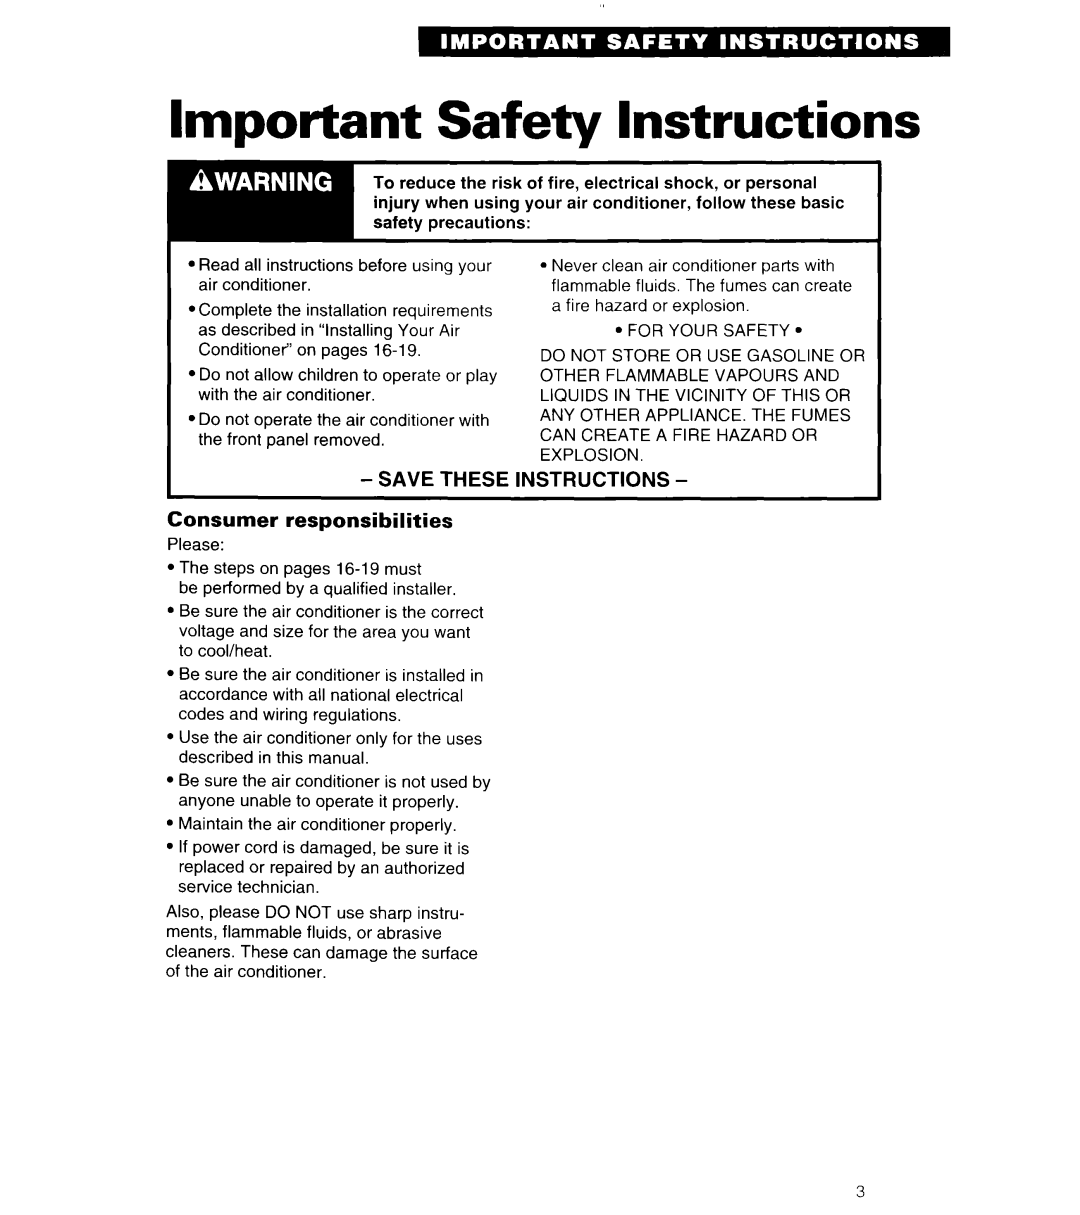 Whirlpool 3PACH21DD0 Important Safety Instructions, Consumer responsibilities, Save These Instructions 